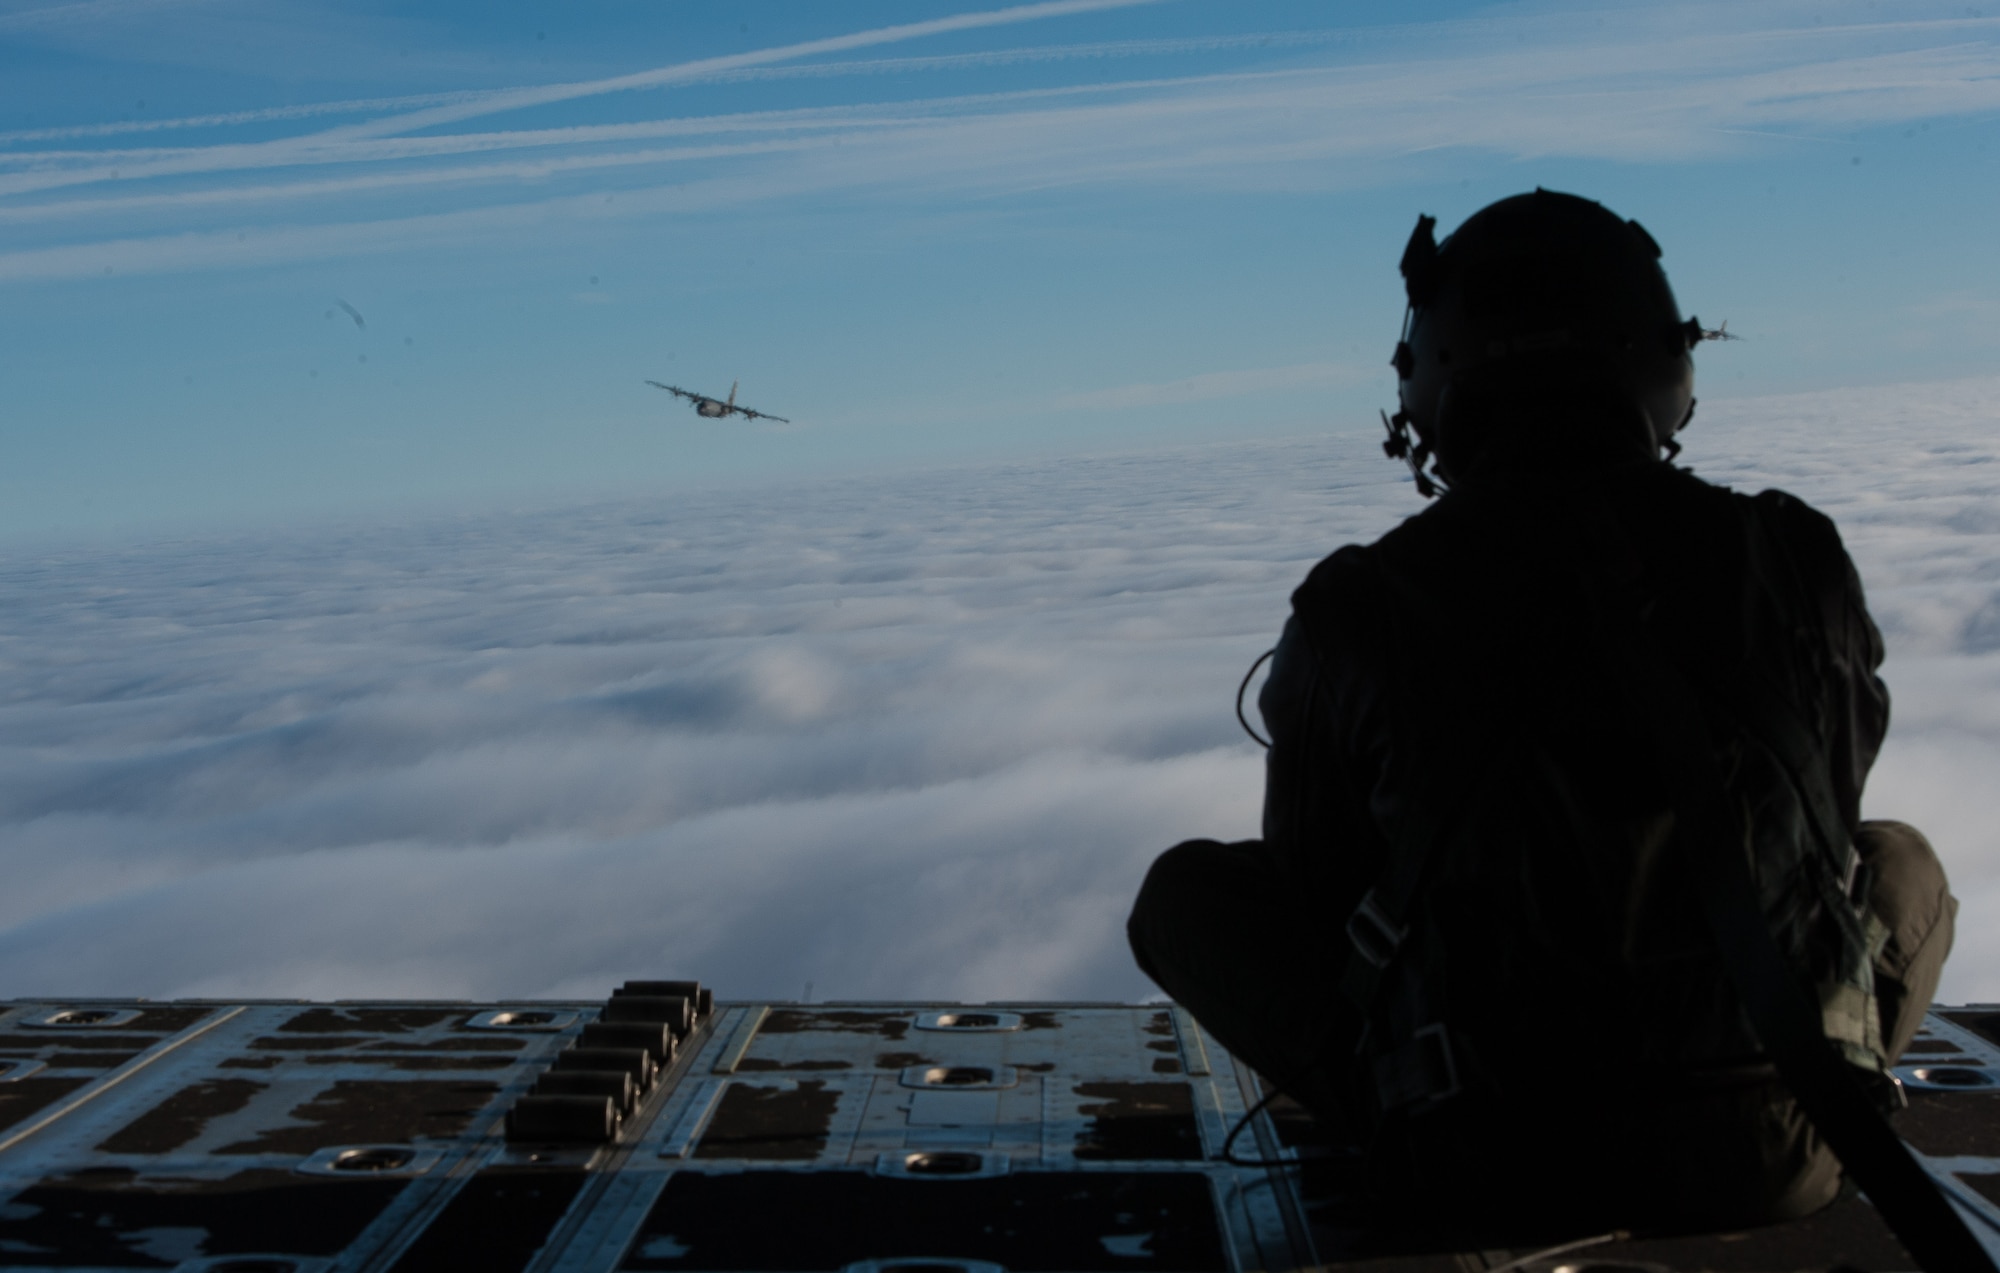 Airman 1st Class Quinn Harris, 37th Airlift Squadron loadmaster, peers over the skies at another C-130J Super Hercules flying over a blanket of clouds in Germany Feb. 10, 2017. During the Korean War, the squadron flew airborne assaults at Sukchon and Munsan-ni and aerial transportation between Japan and Korea. (U.S. Air Force photo by Senior Airman Lane T. Plummer)